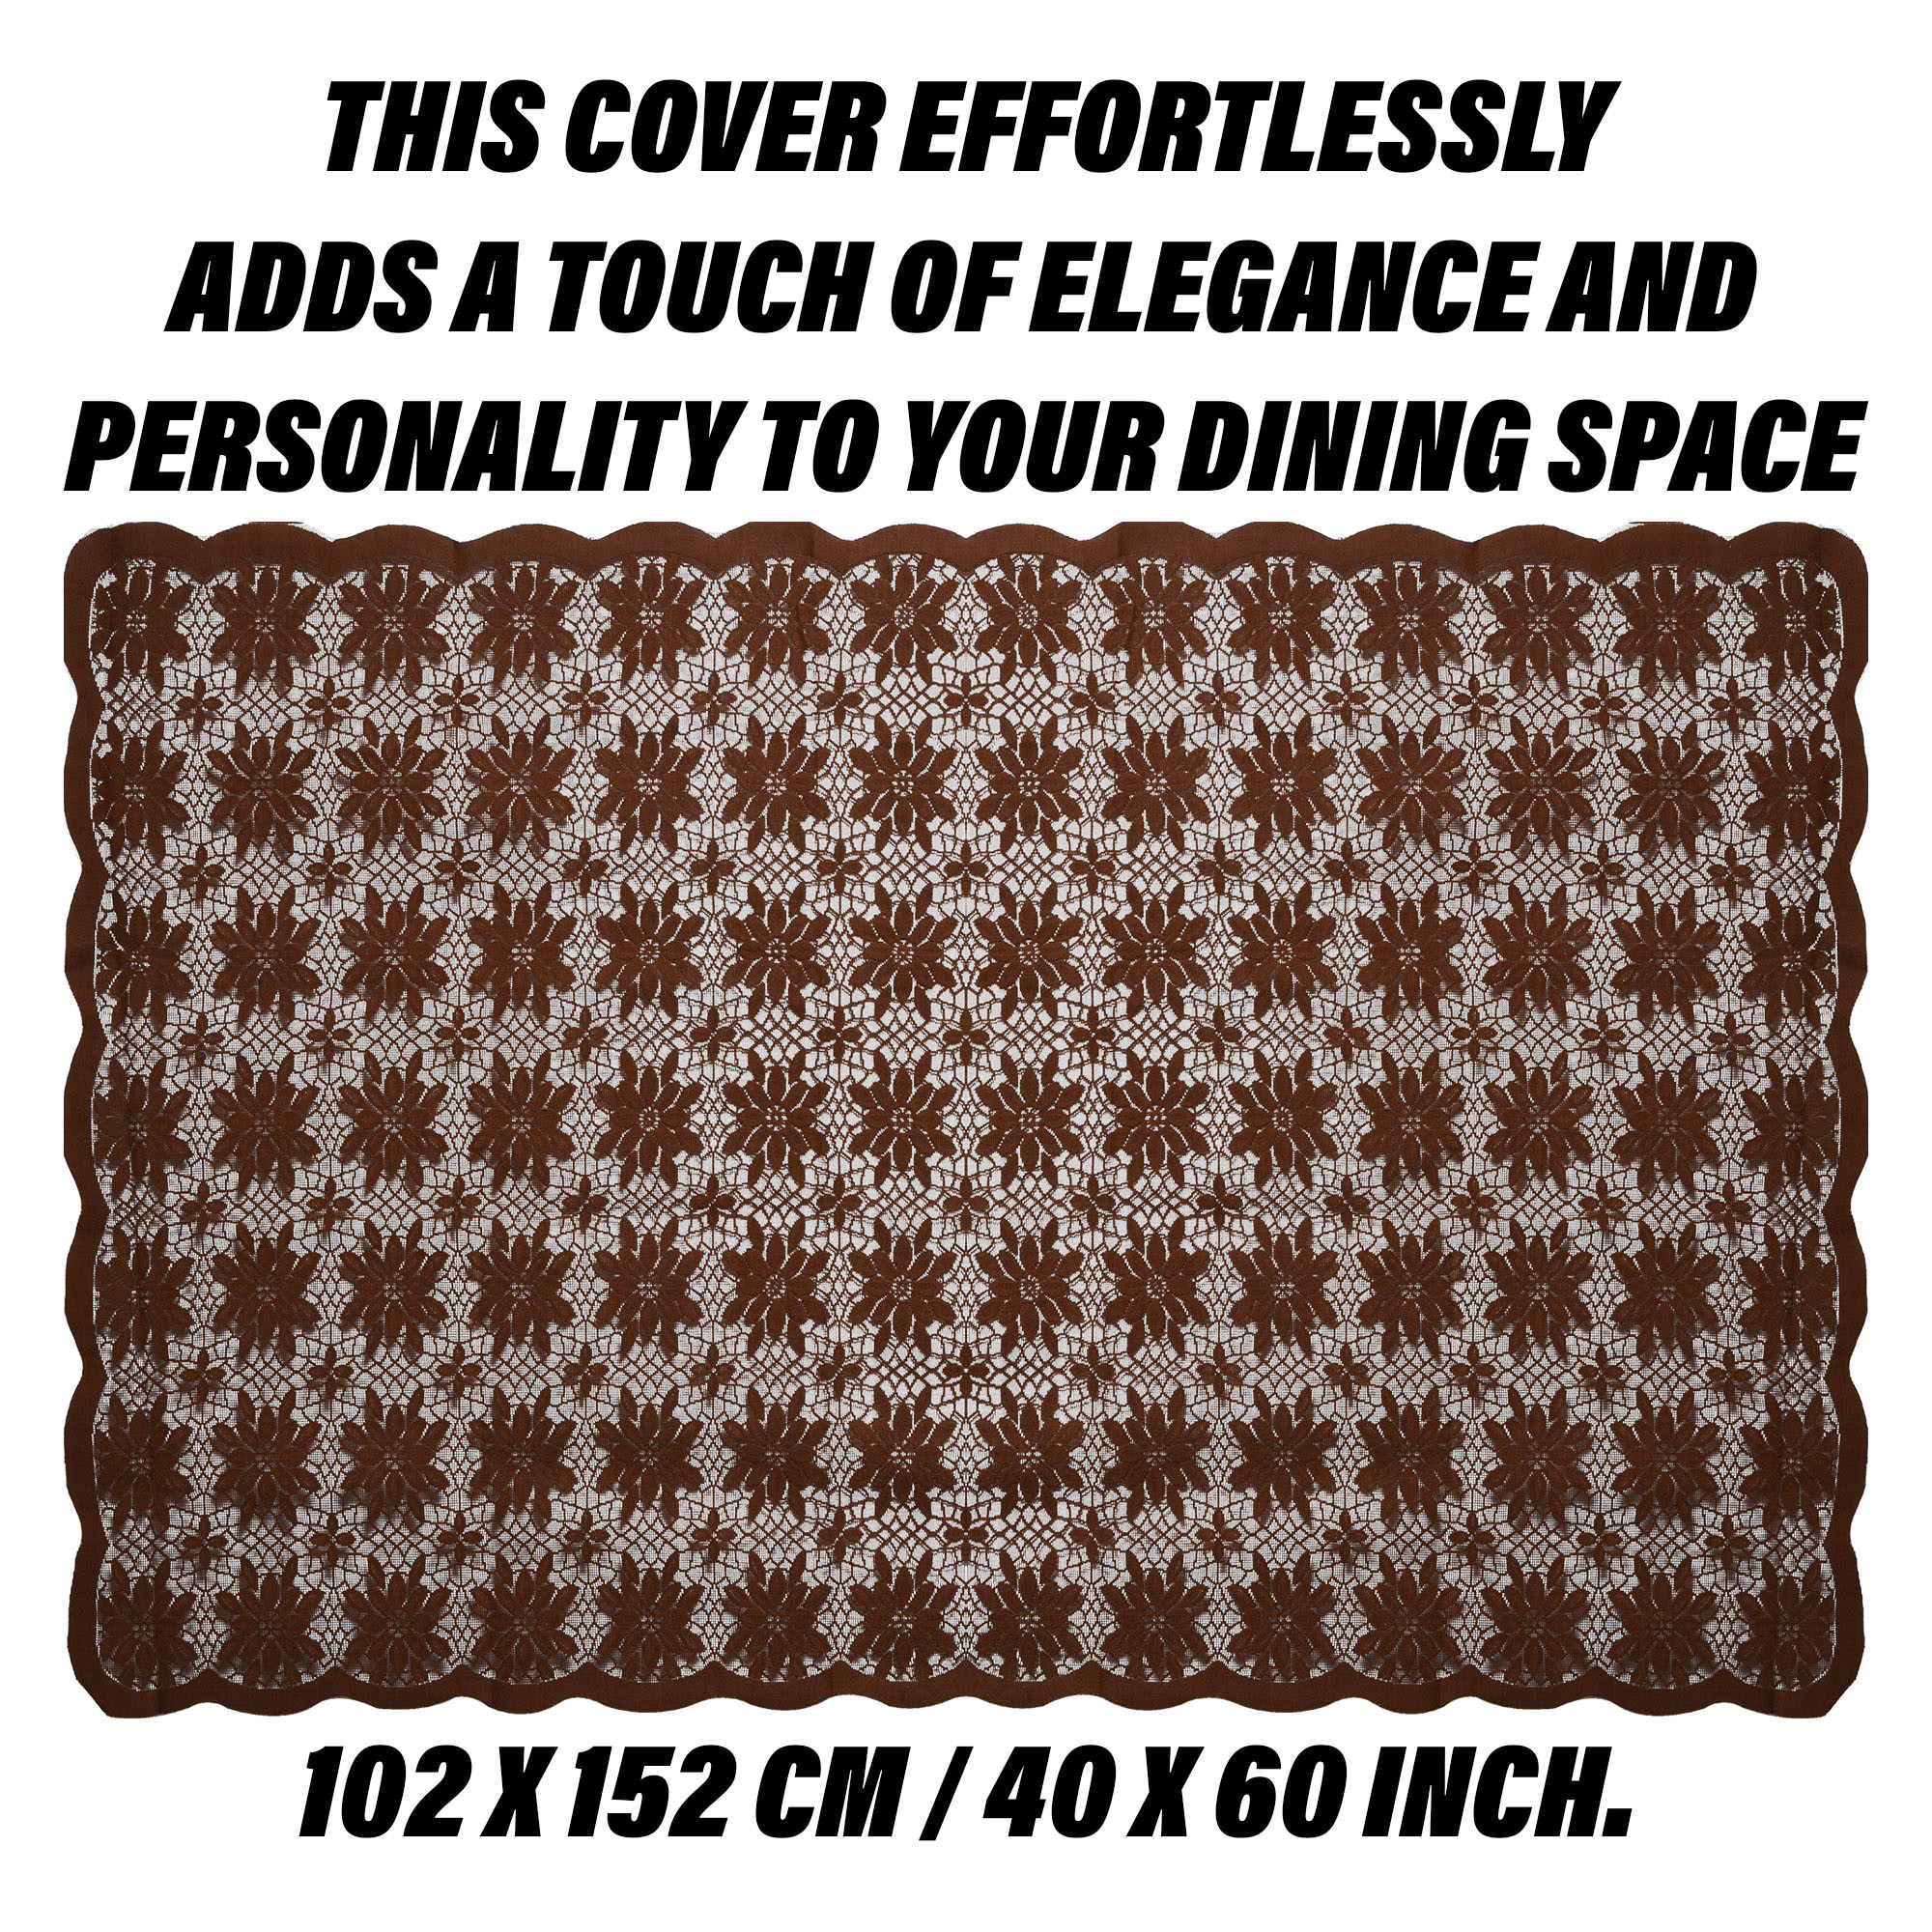 Kuber Industries Center Table Cover | Cotton Table Cloth Cover | 4-Seater Table Cloth | Table Protector Cover | Table Cover for Center Table | Plain Jasmin Flower Table Cover | 40x60 Inch | Brown